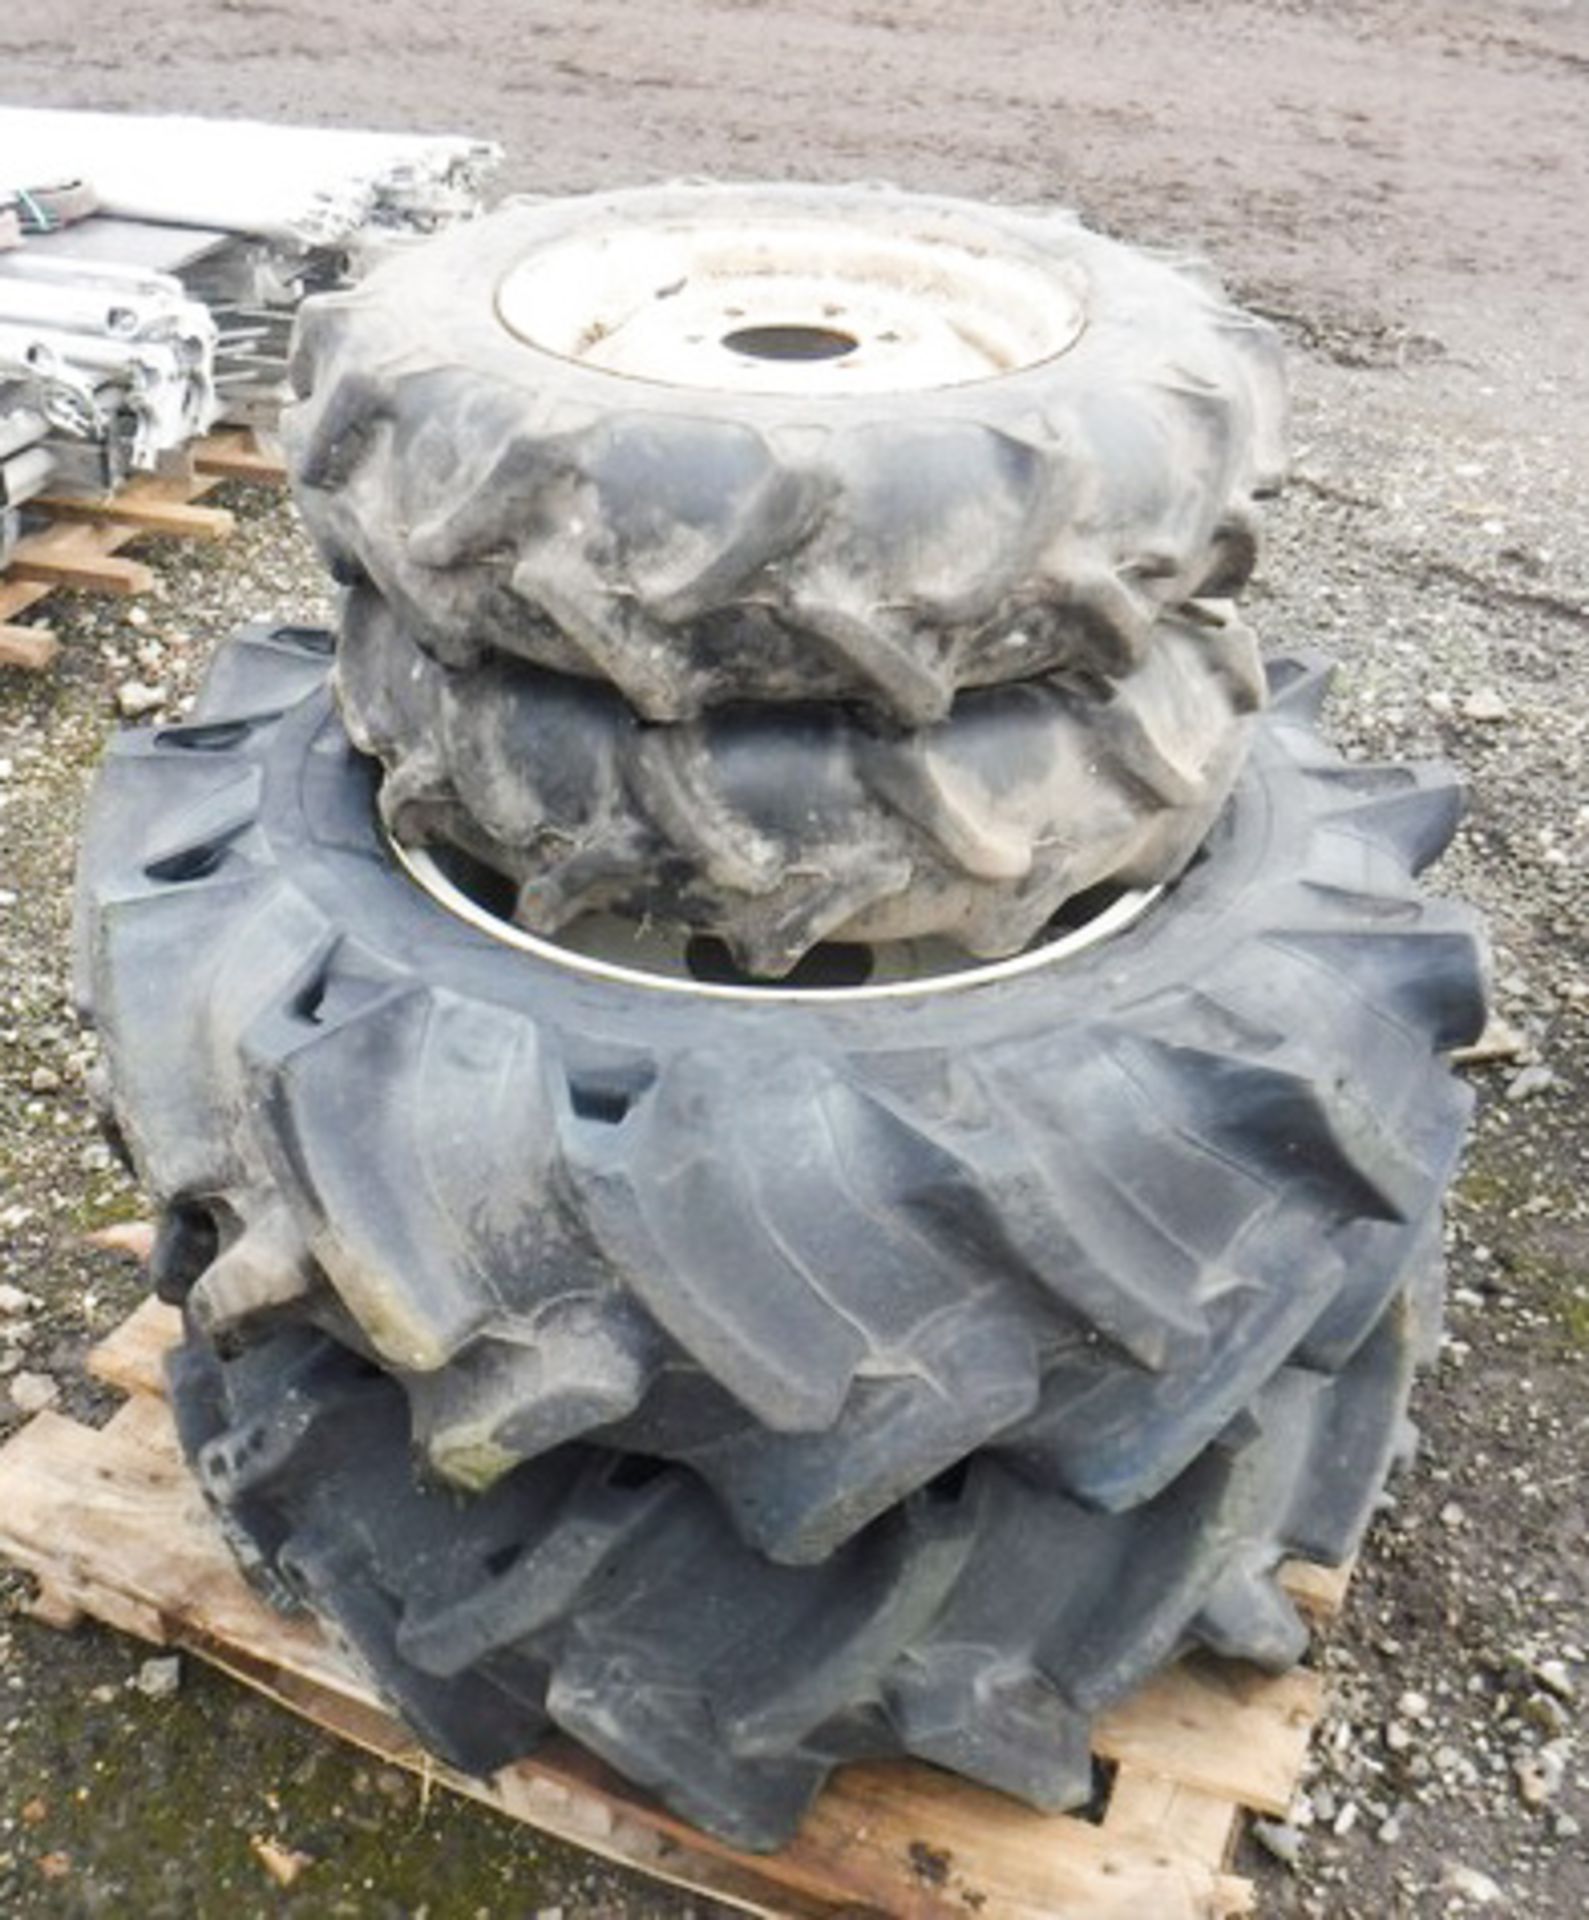 4 X COMPACT TRACTOR TYRES, 2 X 8-16, 2 X 13.6-24